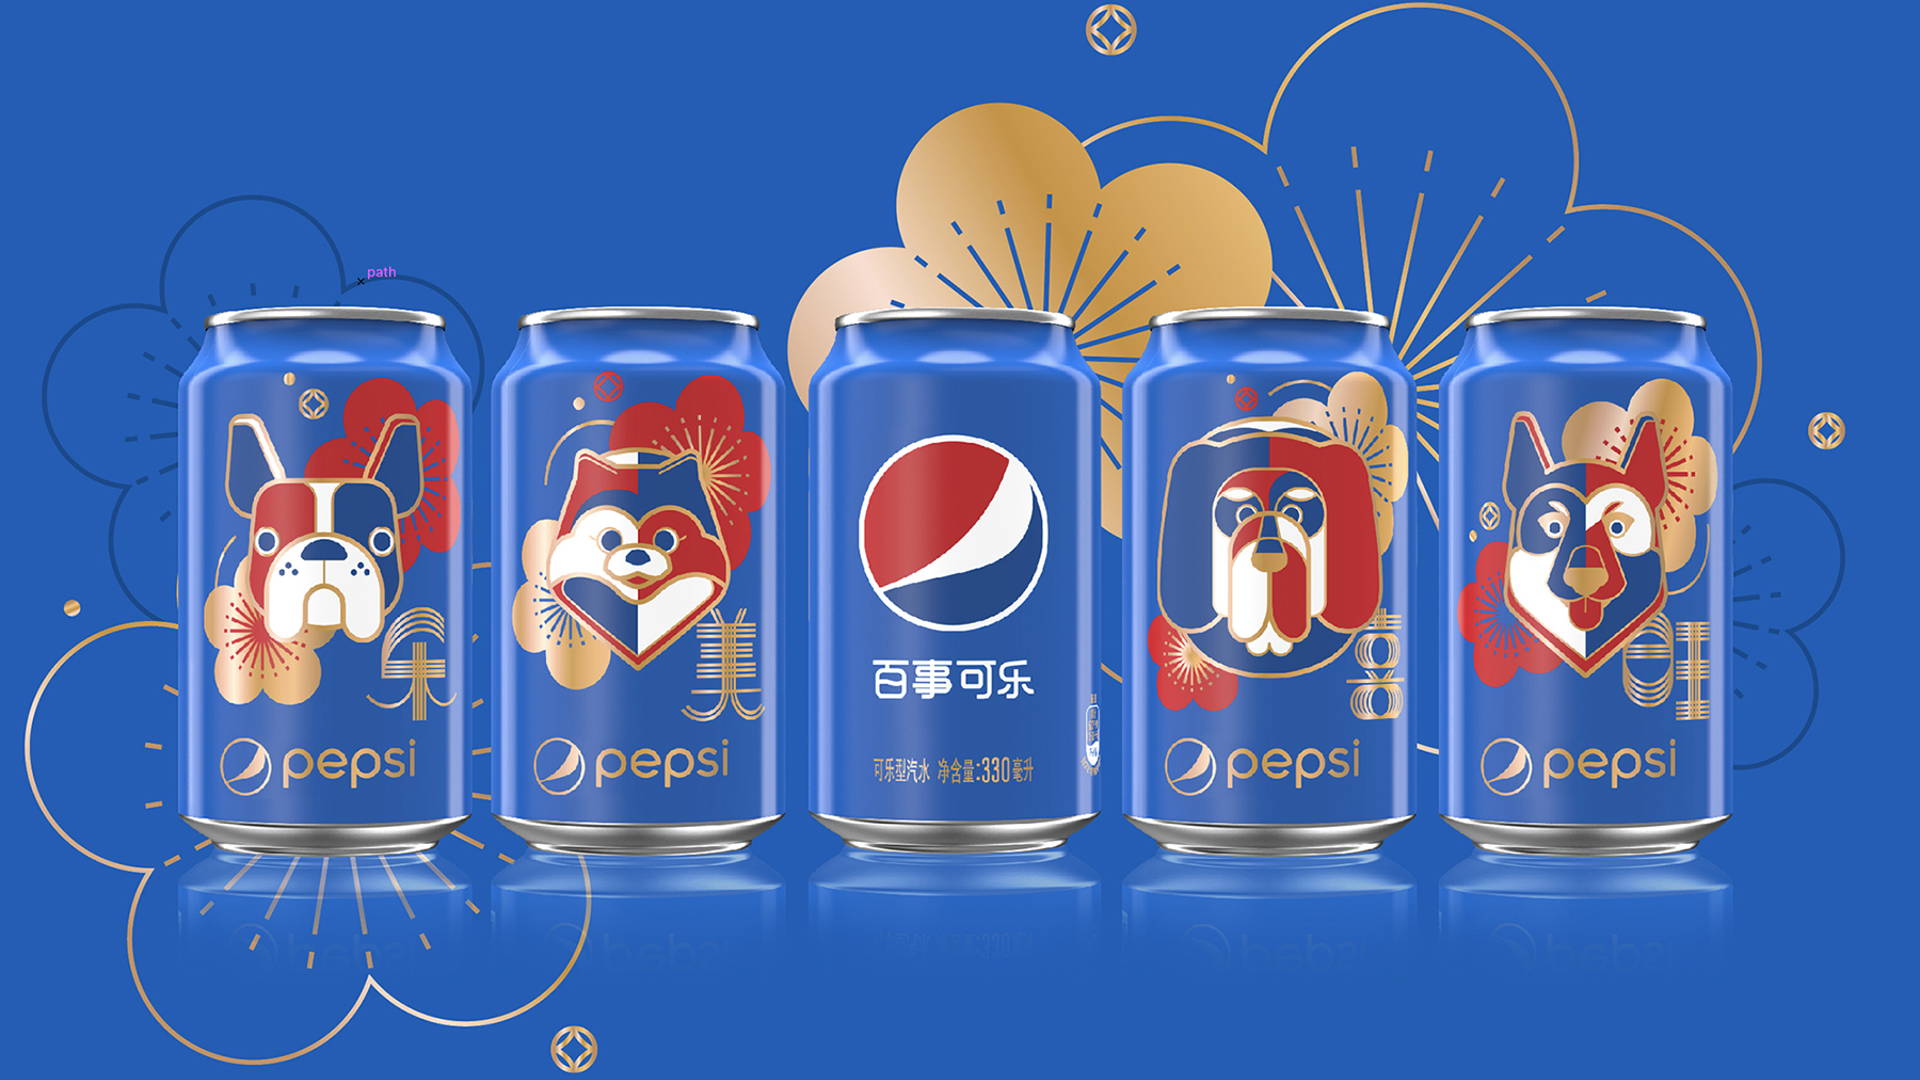 We Love These Special Edition Pepsi Cans Created For 2018's Chinese New  Year | Dieline - Design, Branding & Packaging Inspiration